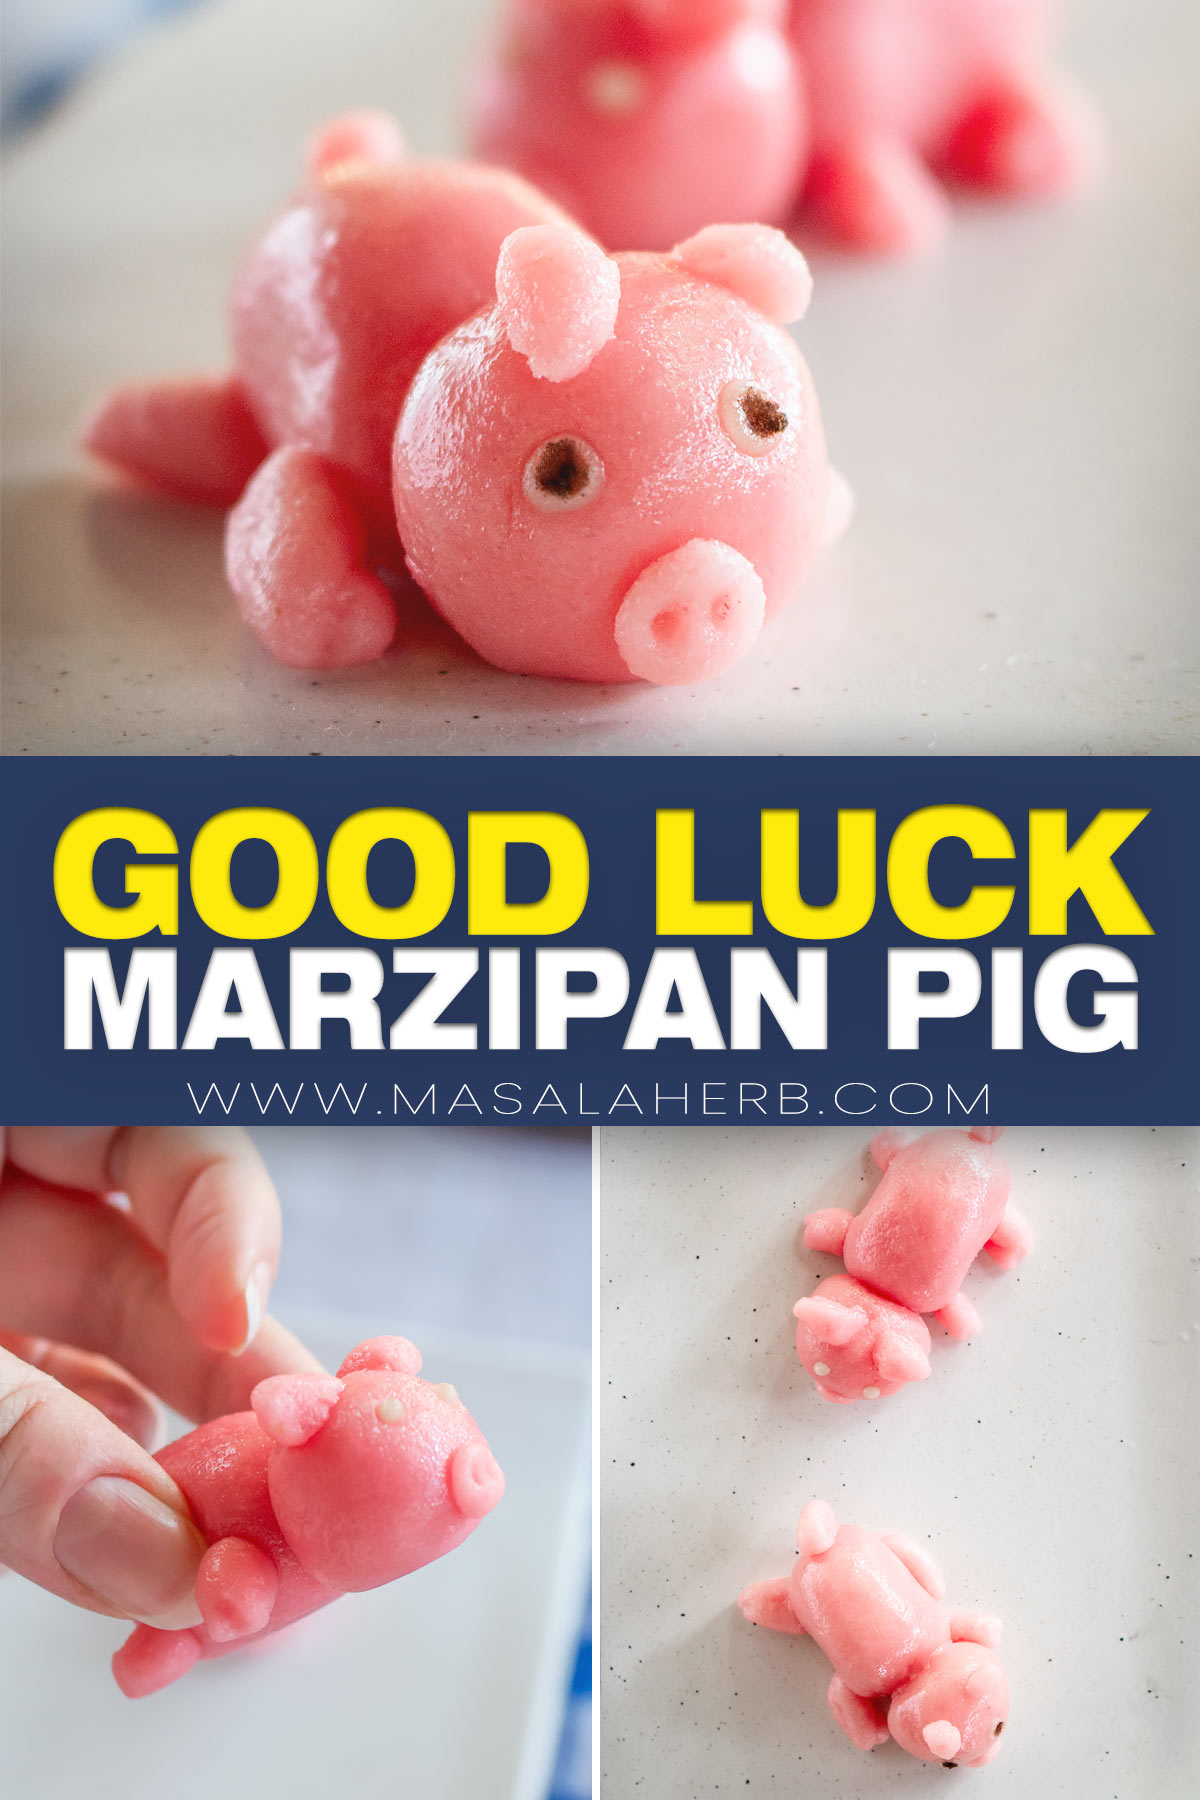 A Good Luck Cookie for the Year of the Pig - The New York Times